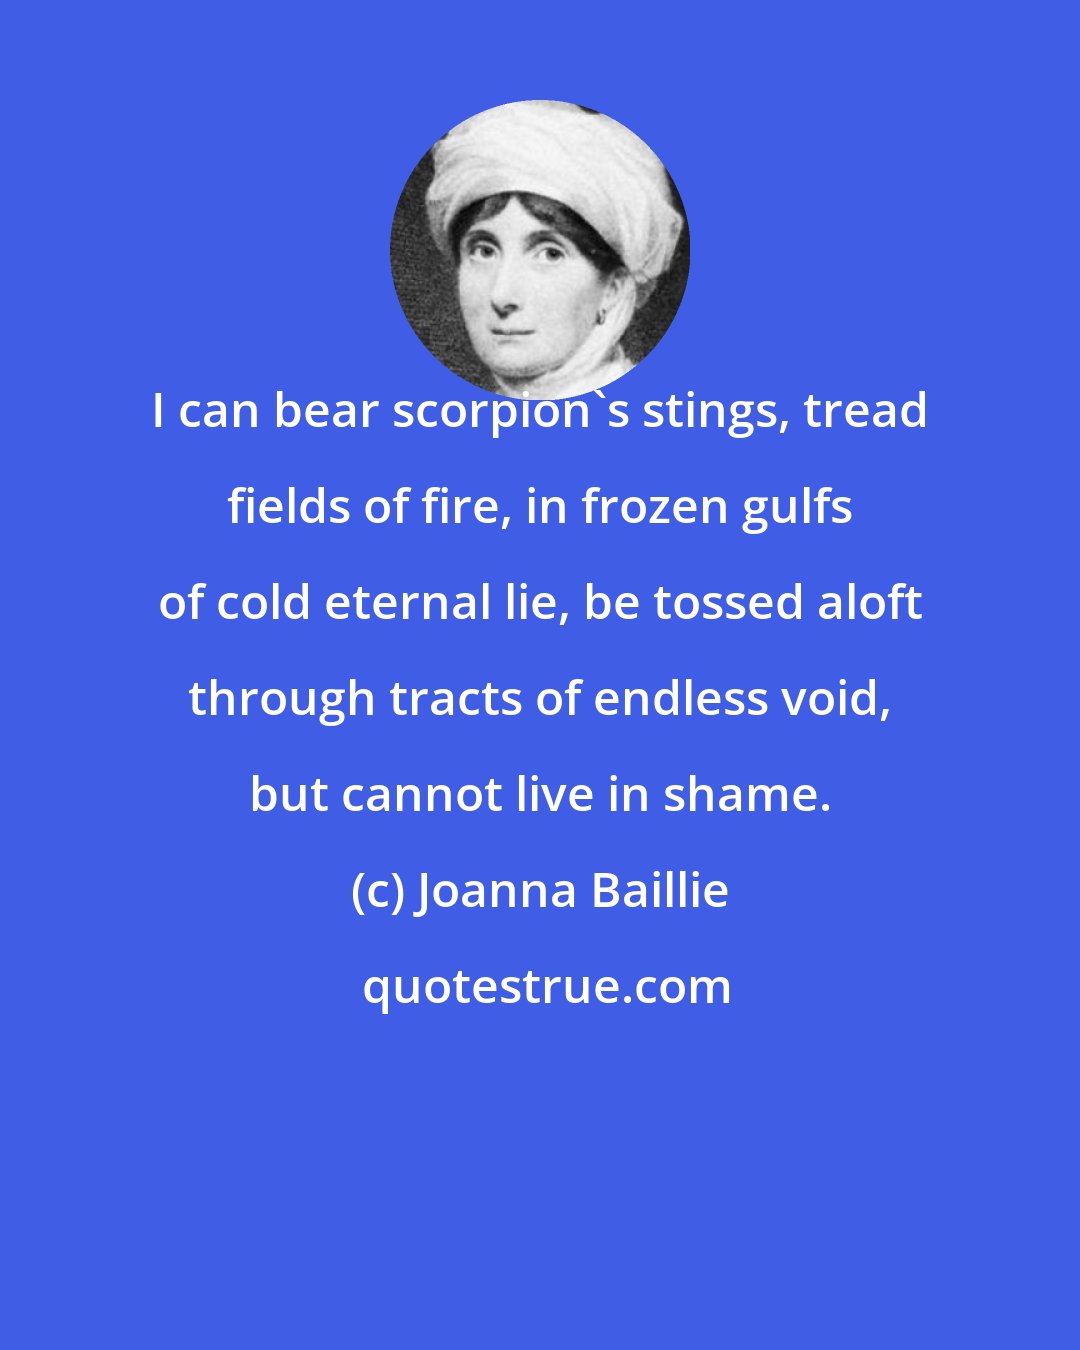 Joanna Baillie: I can bear scorpion's stings, tread fields of fire, in frozen gulfs of cold eternal lie, be tossed aloft through tracts of endless void, but cannot live in shame.